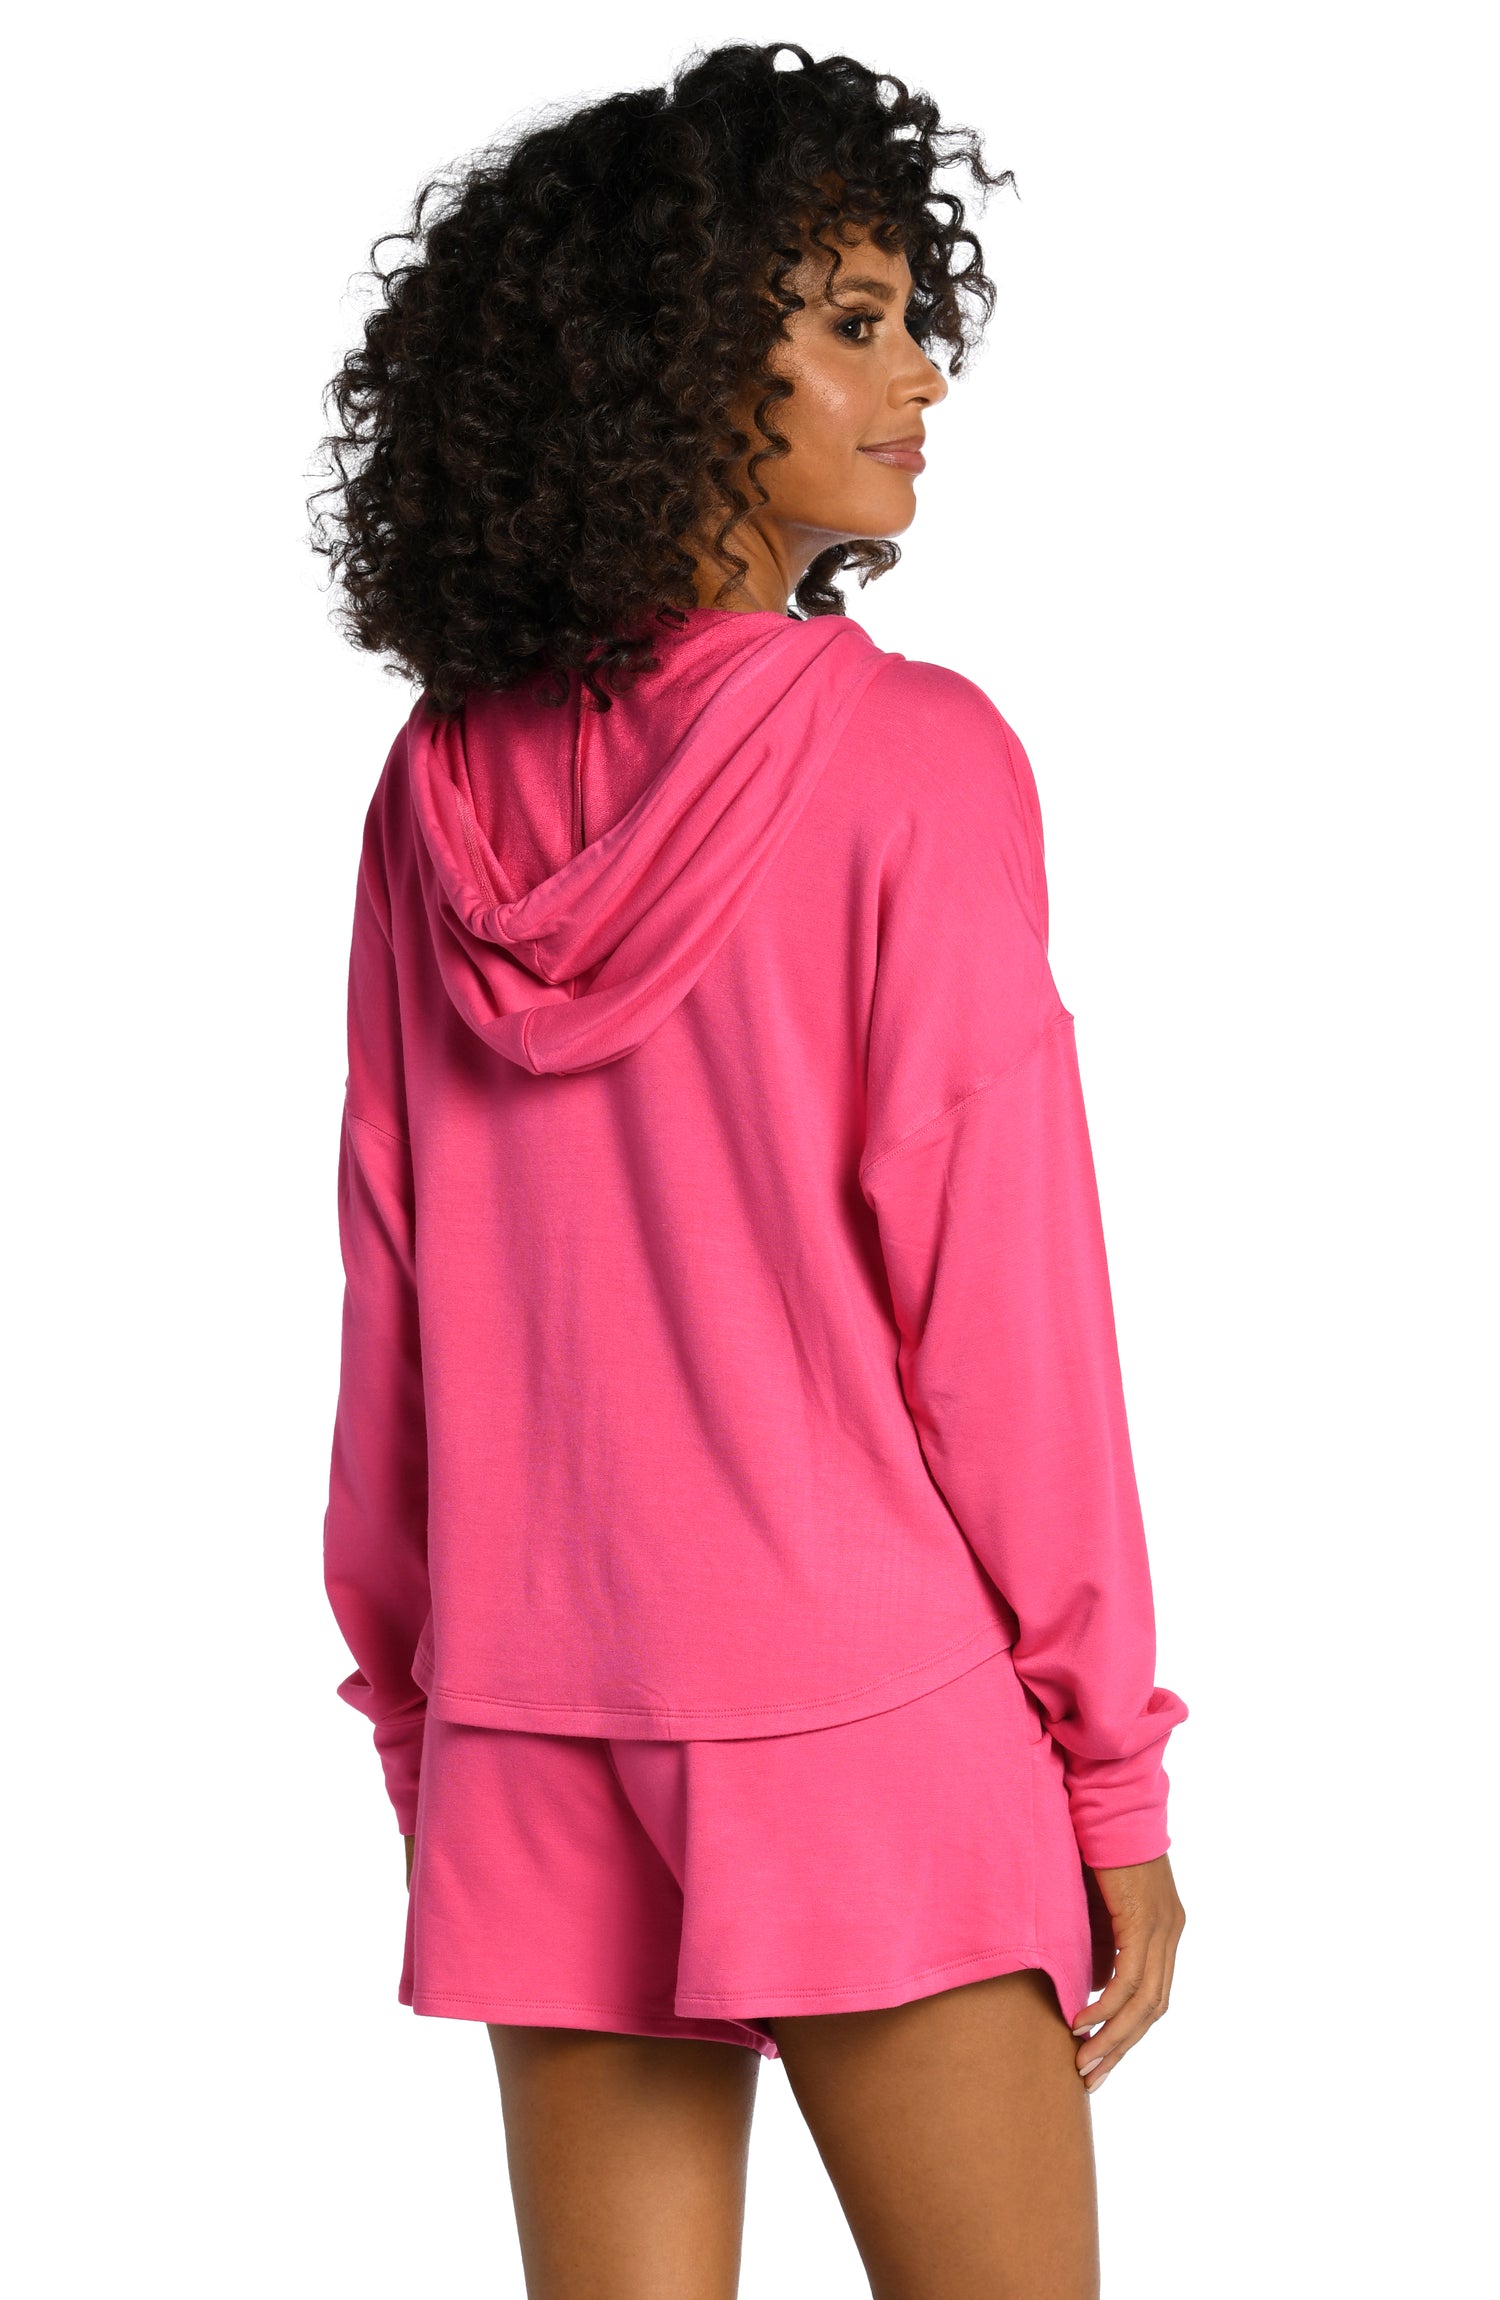 Model is wearing a pop pink colored knitted joggers from our Living in Leisure collection!